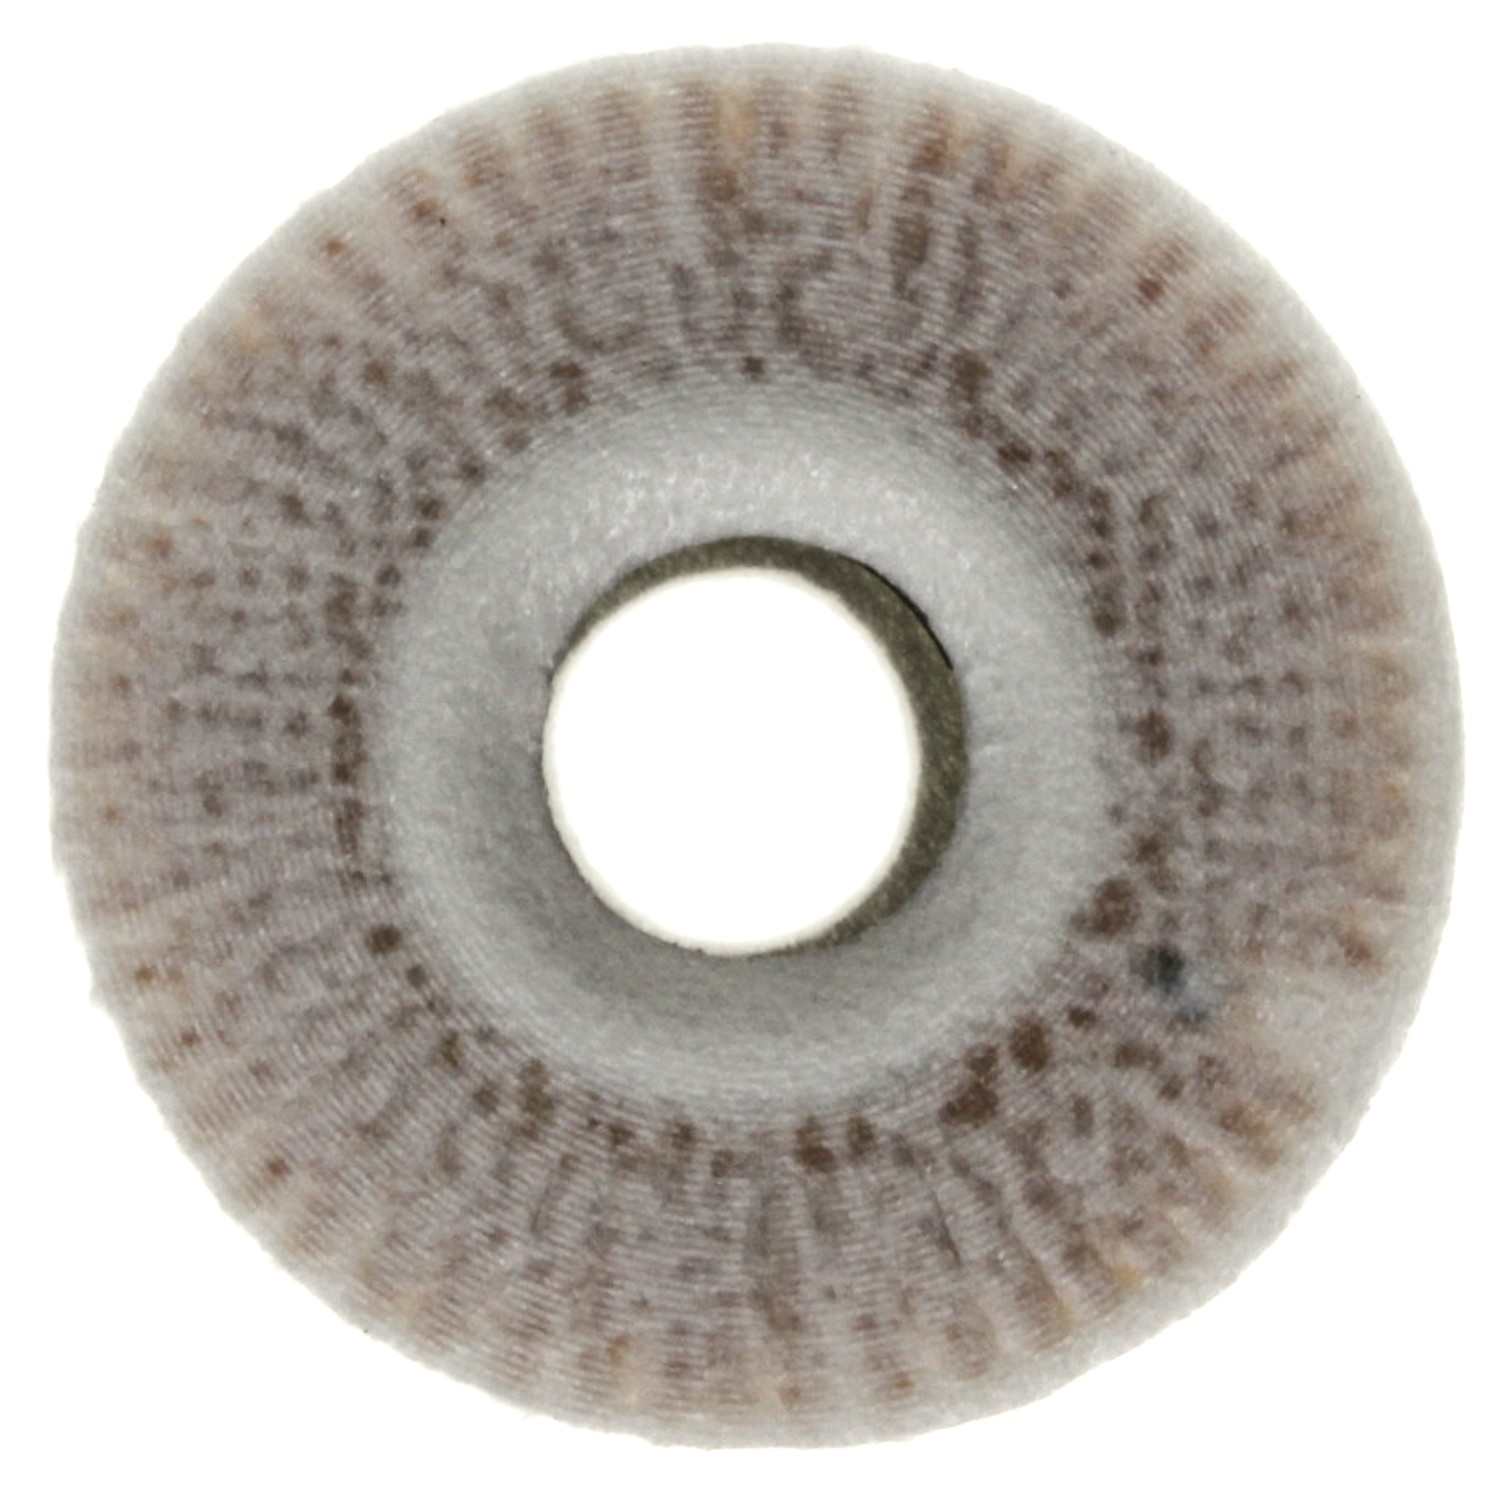 Bottom View of Engine Oil Filter MAHLE OX351D